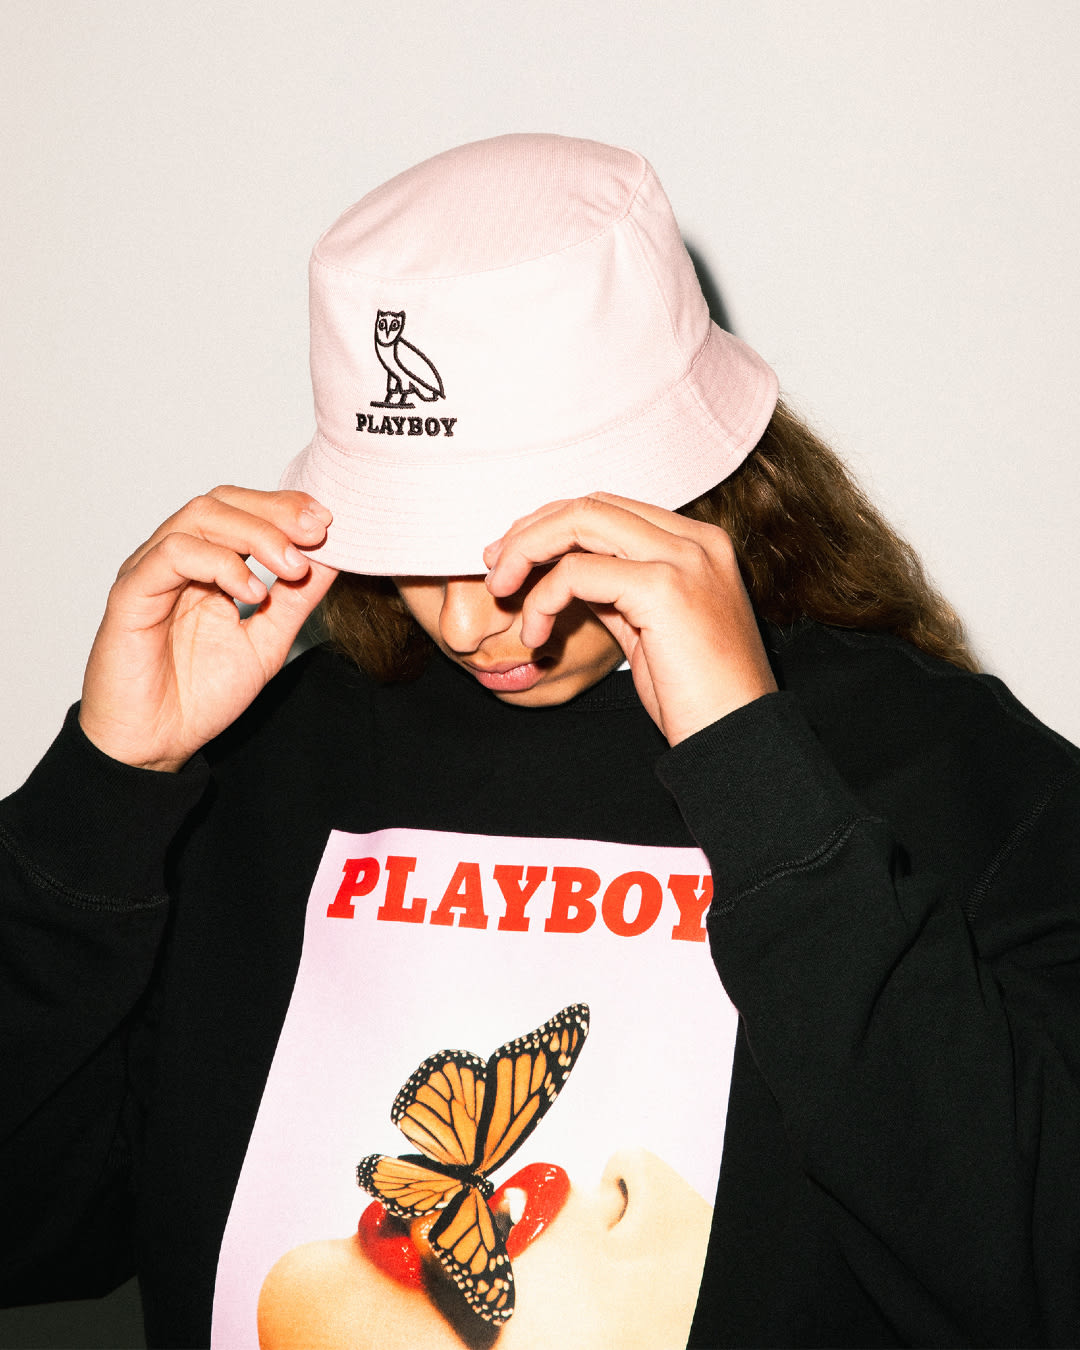 A model wearing a pink bucket hat with Playboy and OVO branding. He is also wearing a black crewneck